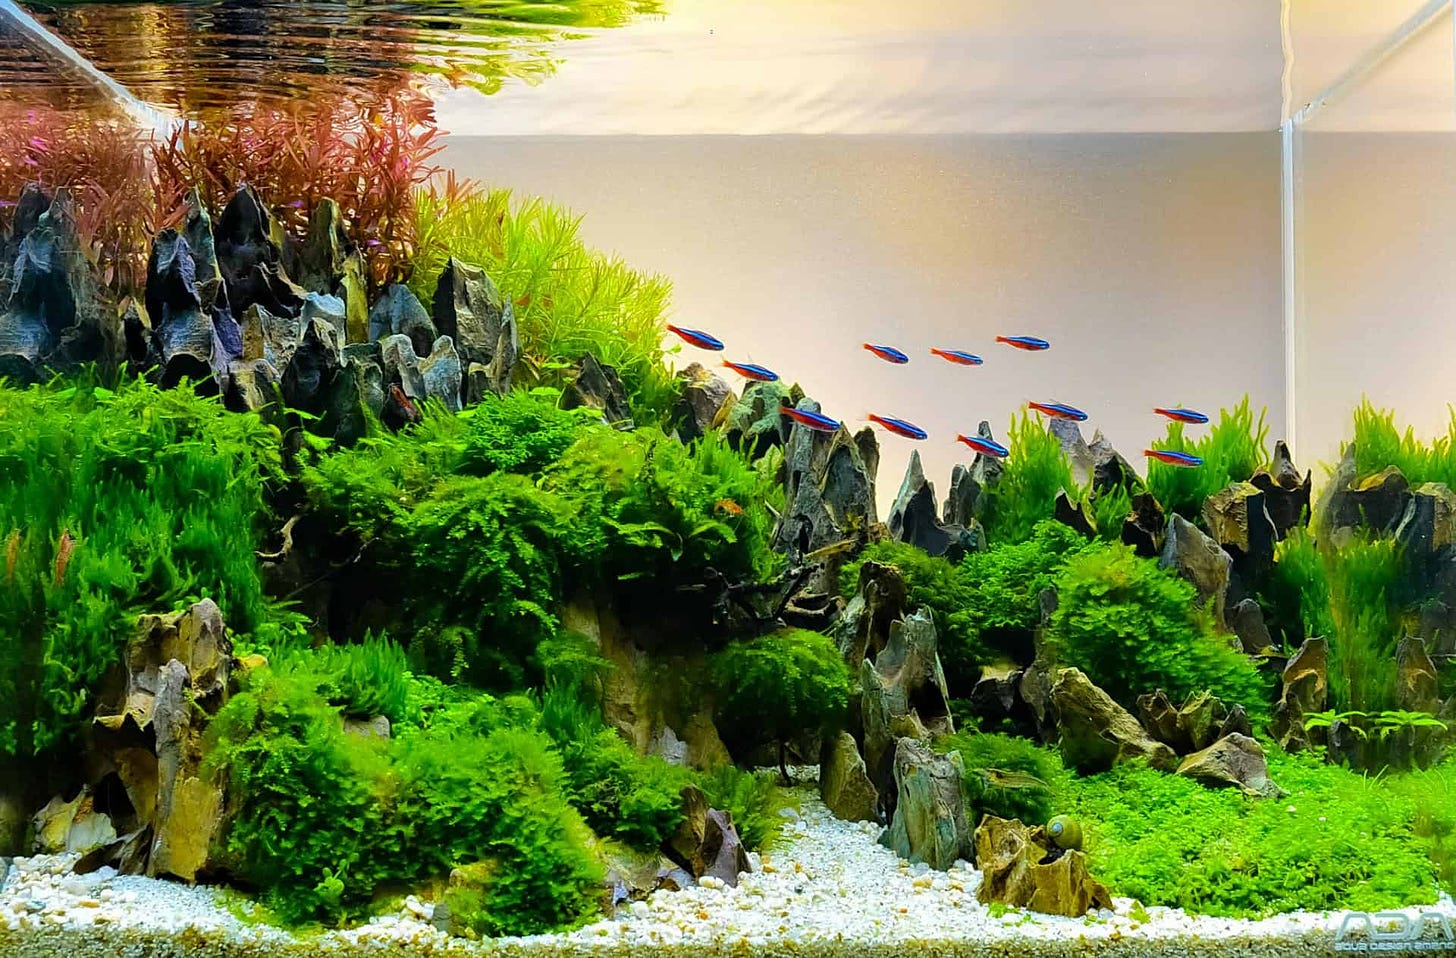 A photo from Aquascaping Guru of a fish tank with lots of plant life, and small neon fish swimming